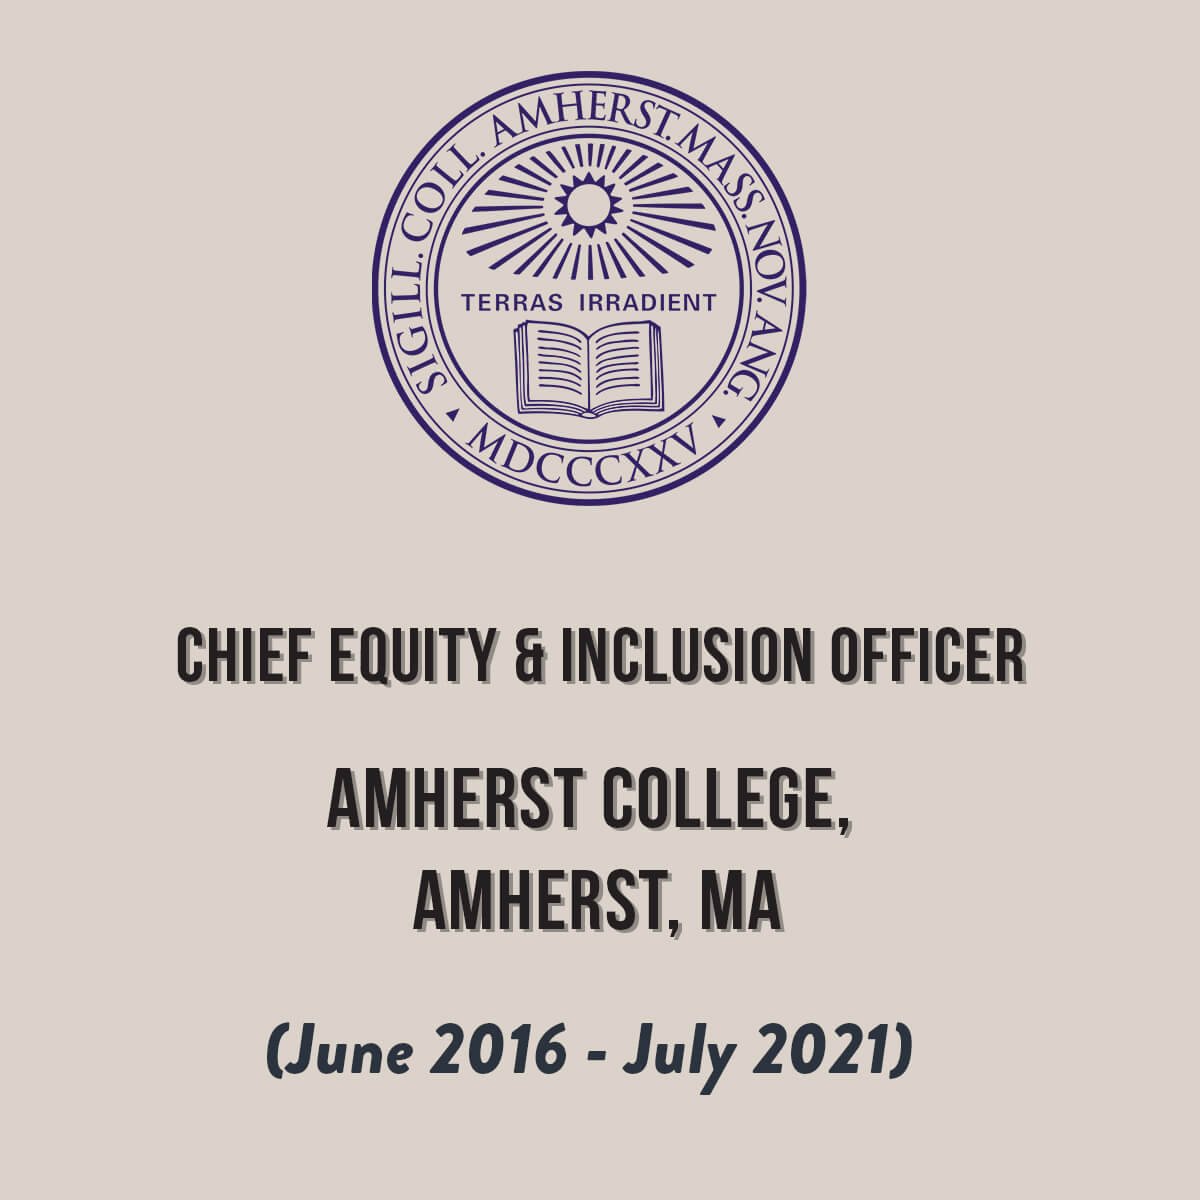 Chief Equity & Inclusion Officer, Amherst College